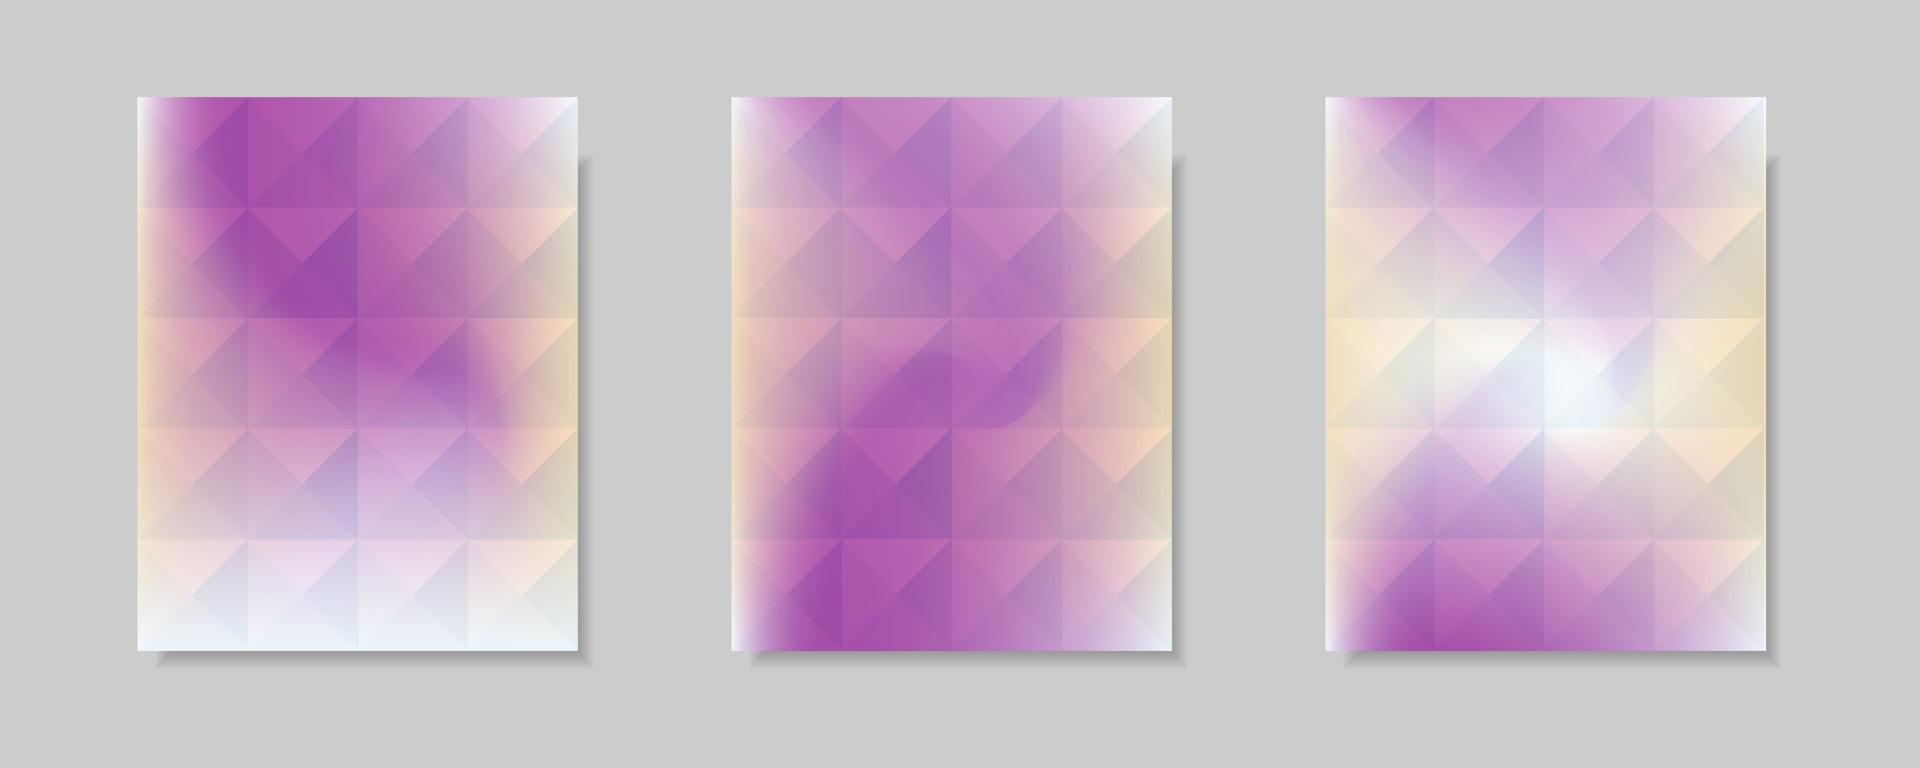 collection of abstract purple white color gradient vector cover backgrounds. Triangle pattern design with crystal shape style. for business brochure backgrounds,  posters and graphic designs.